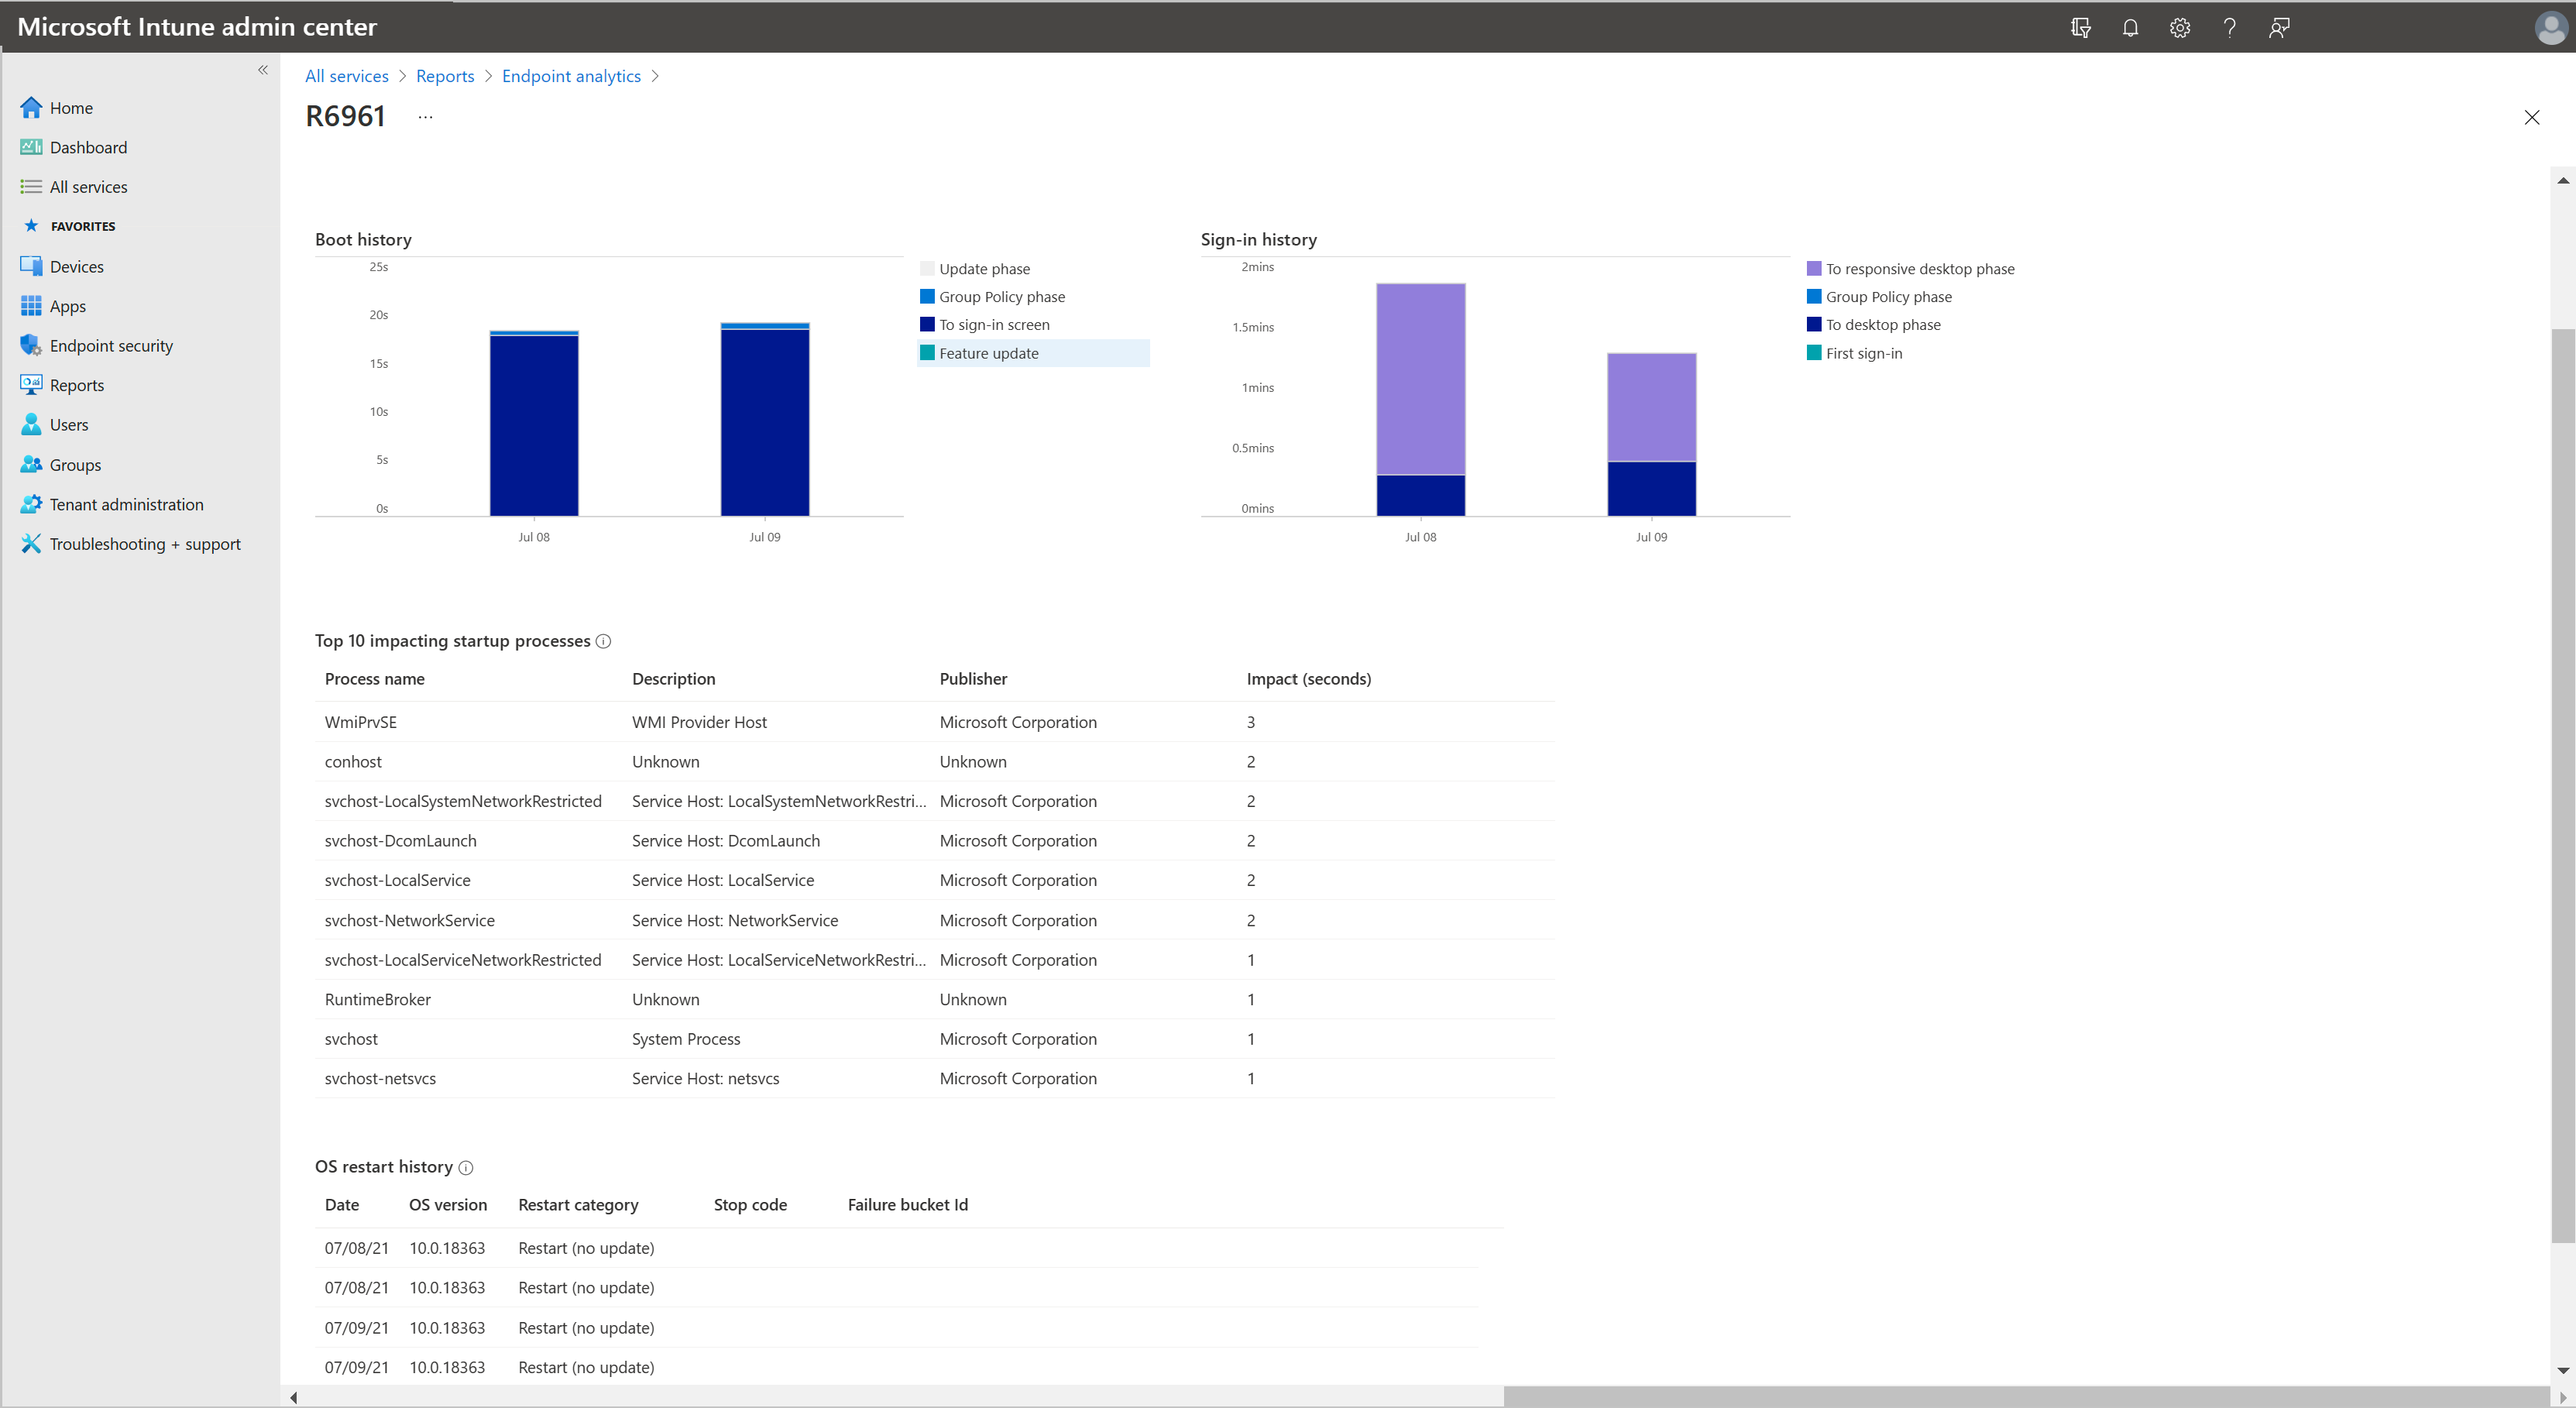 Screenshot of Endpoint analytics startup performance page for a single device.